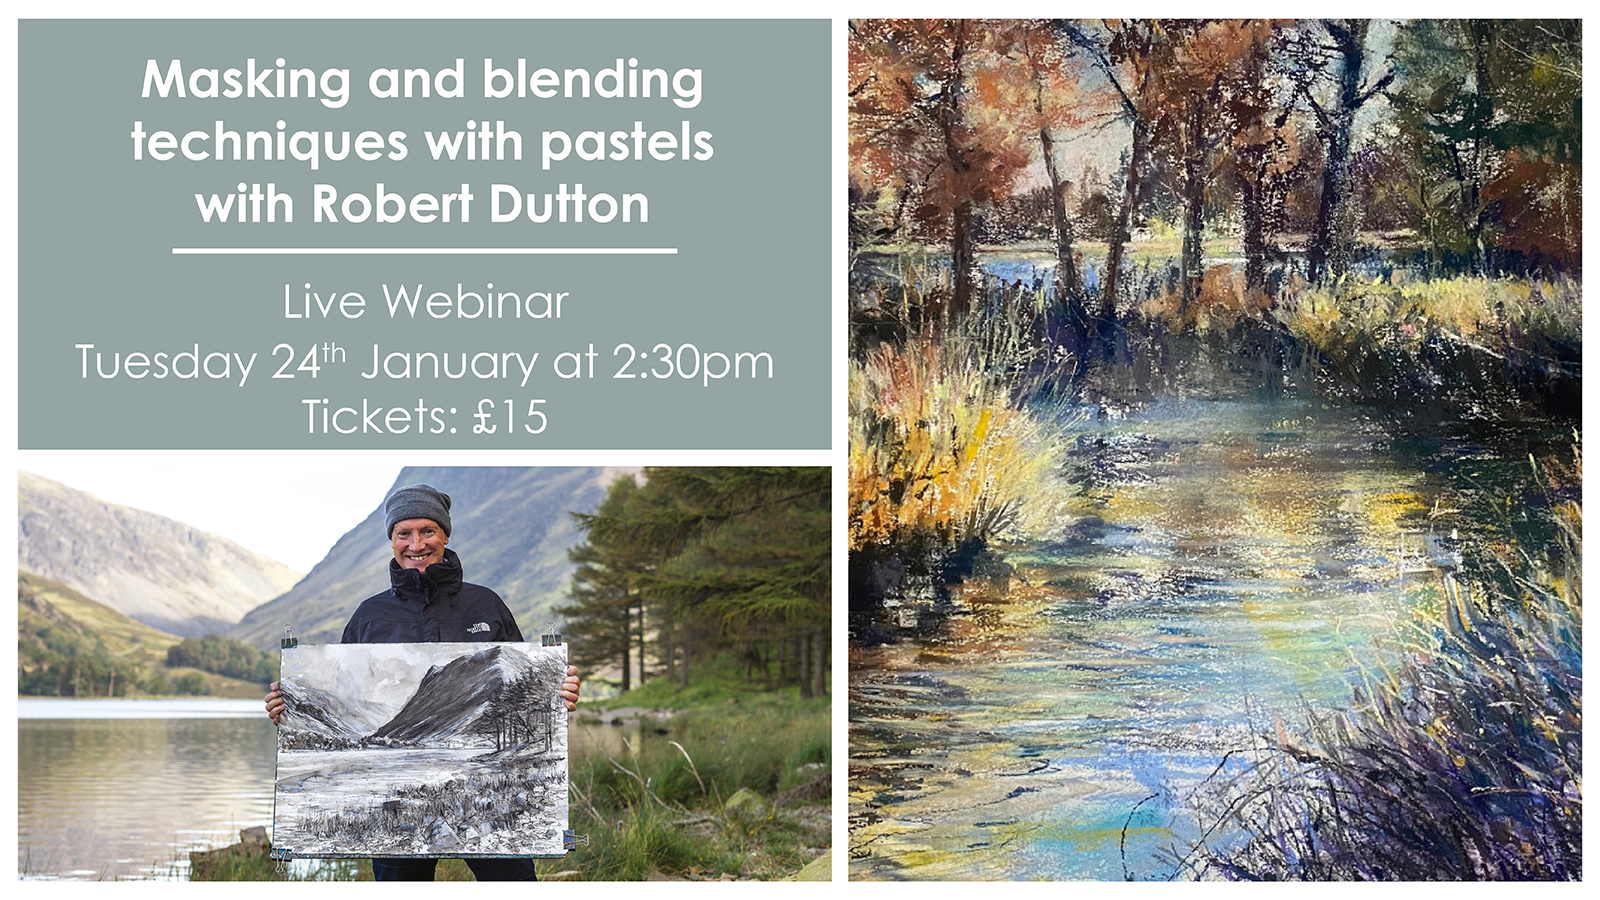 Masking and blending techniques with pastels with Robert Dutton